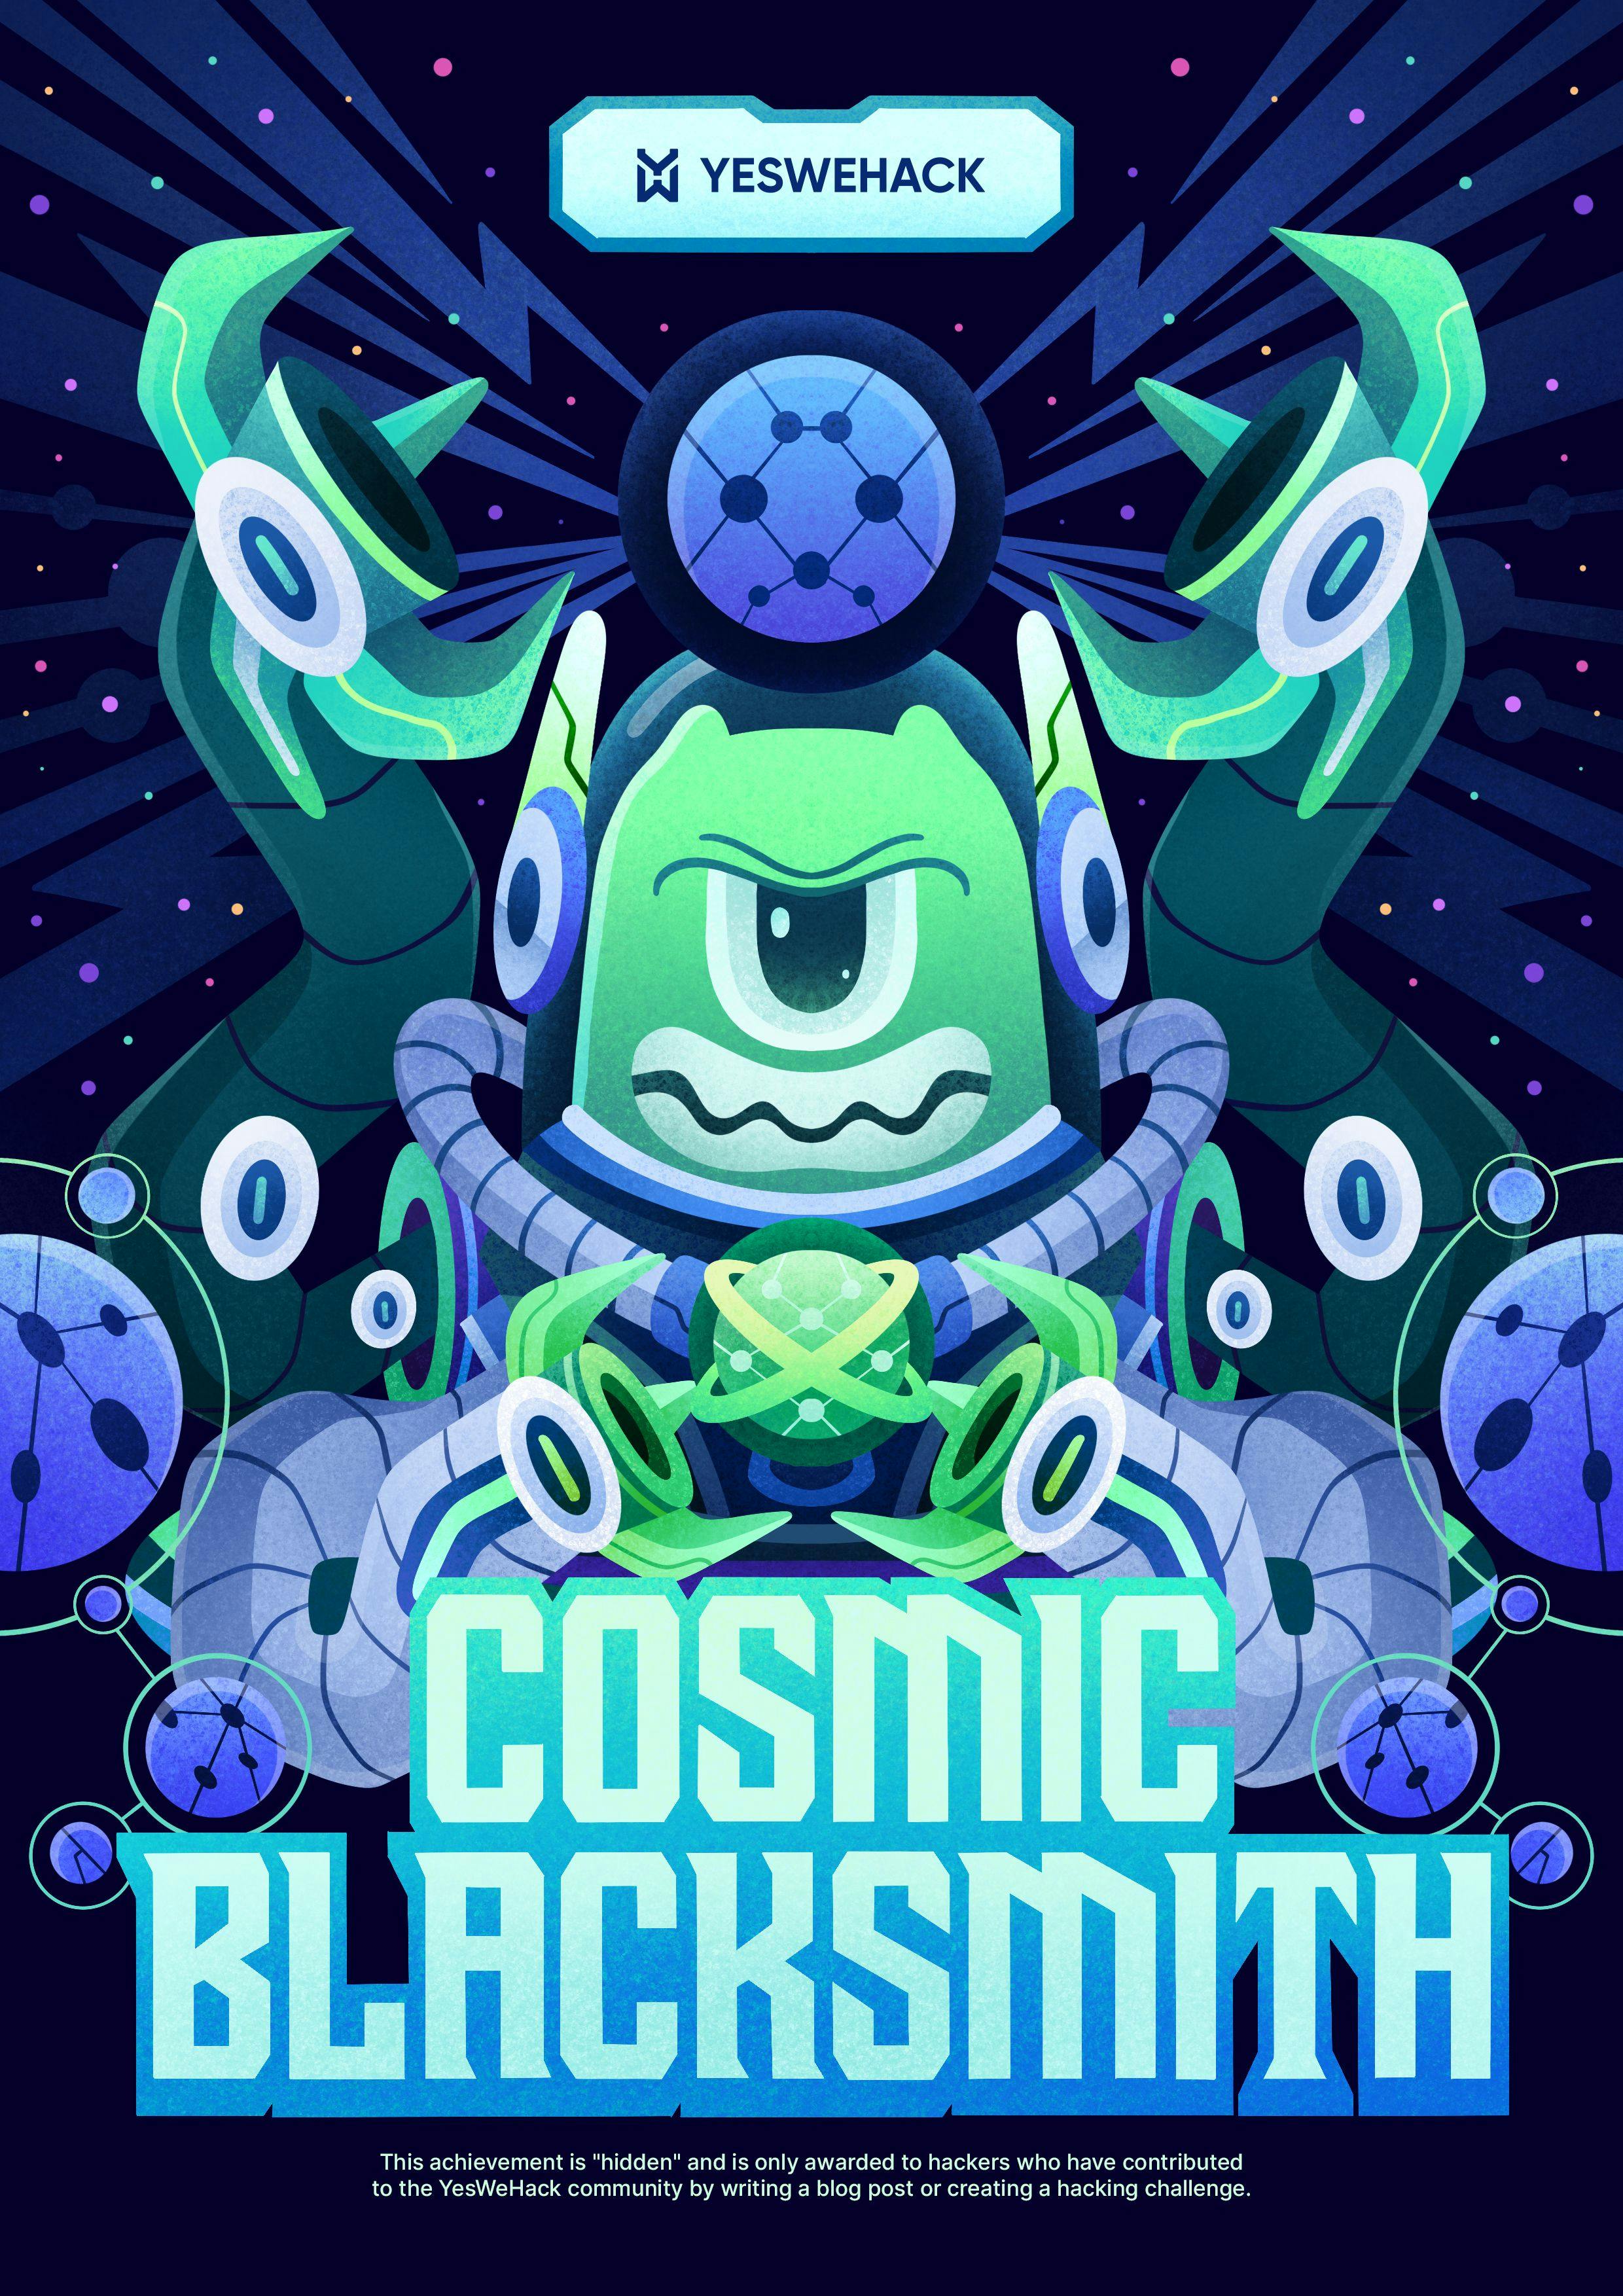 YesWeHack hunter achievements: COSMIC BLACKSMITH poster for ethical hackers who make noteworthy community contributions such as blog posts or DOJO hacking challenges